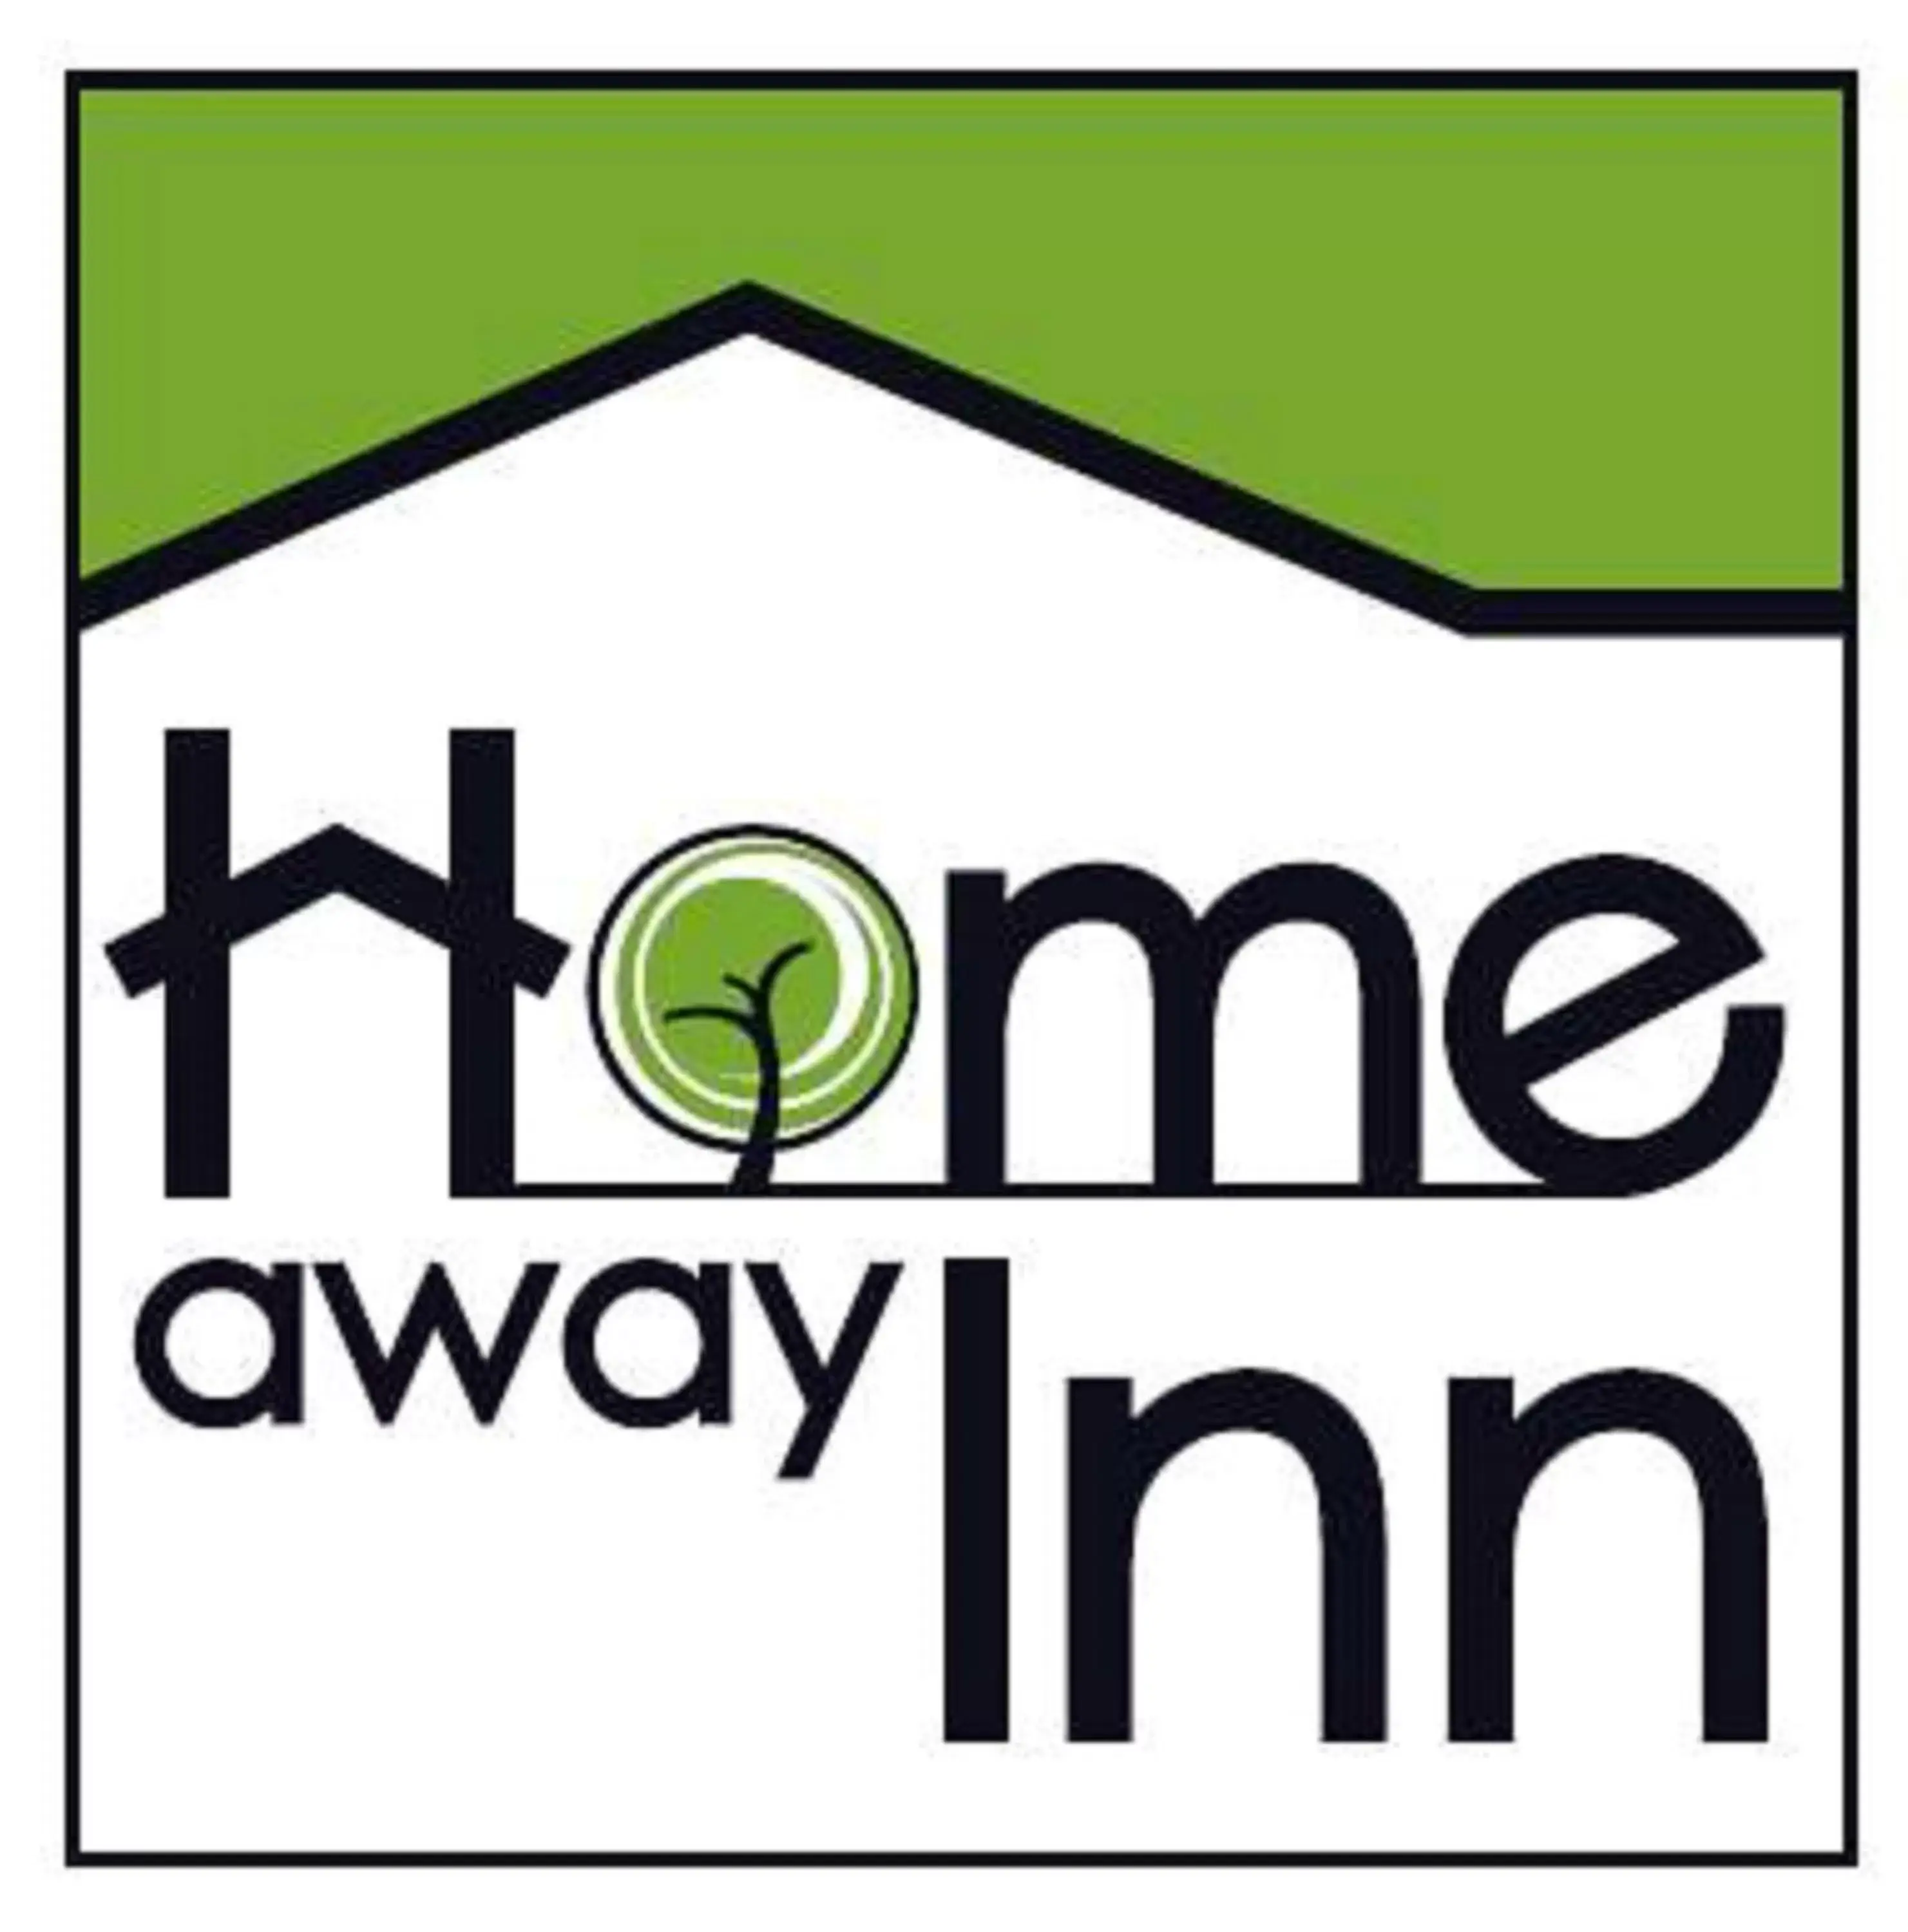 Property logo or sign, Property Logo/Sign in Home Away Inn